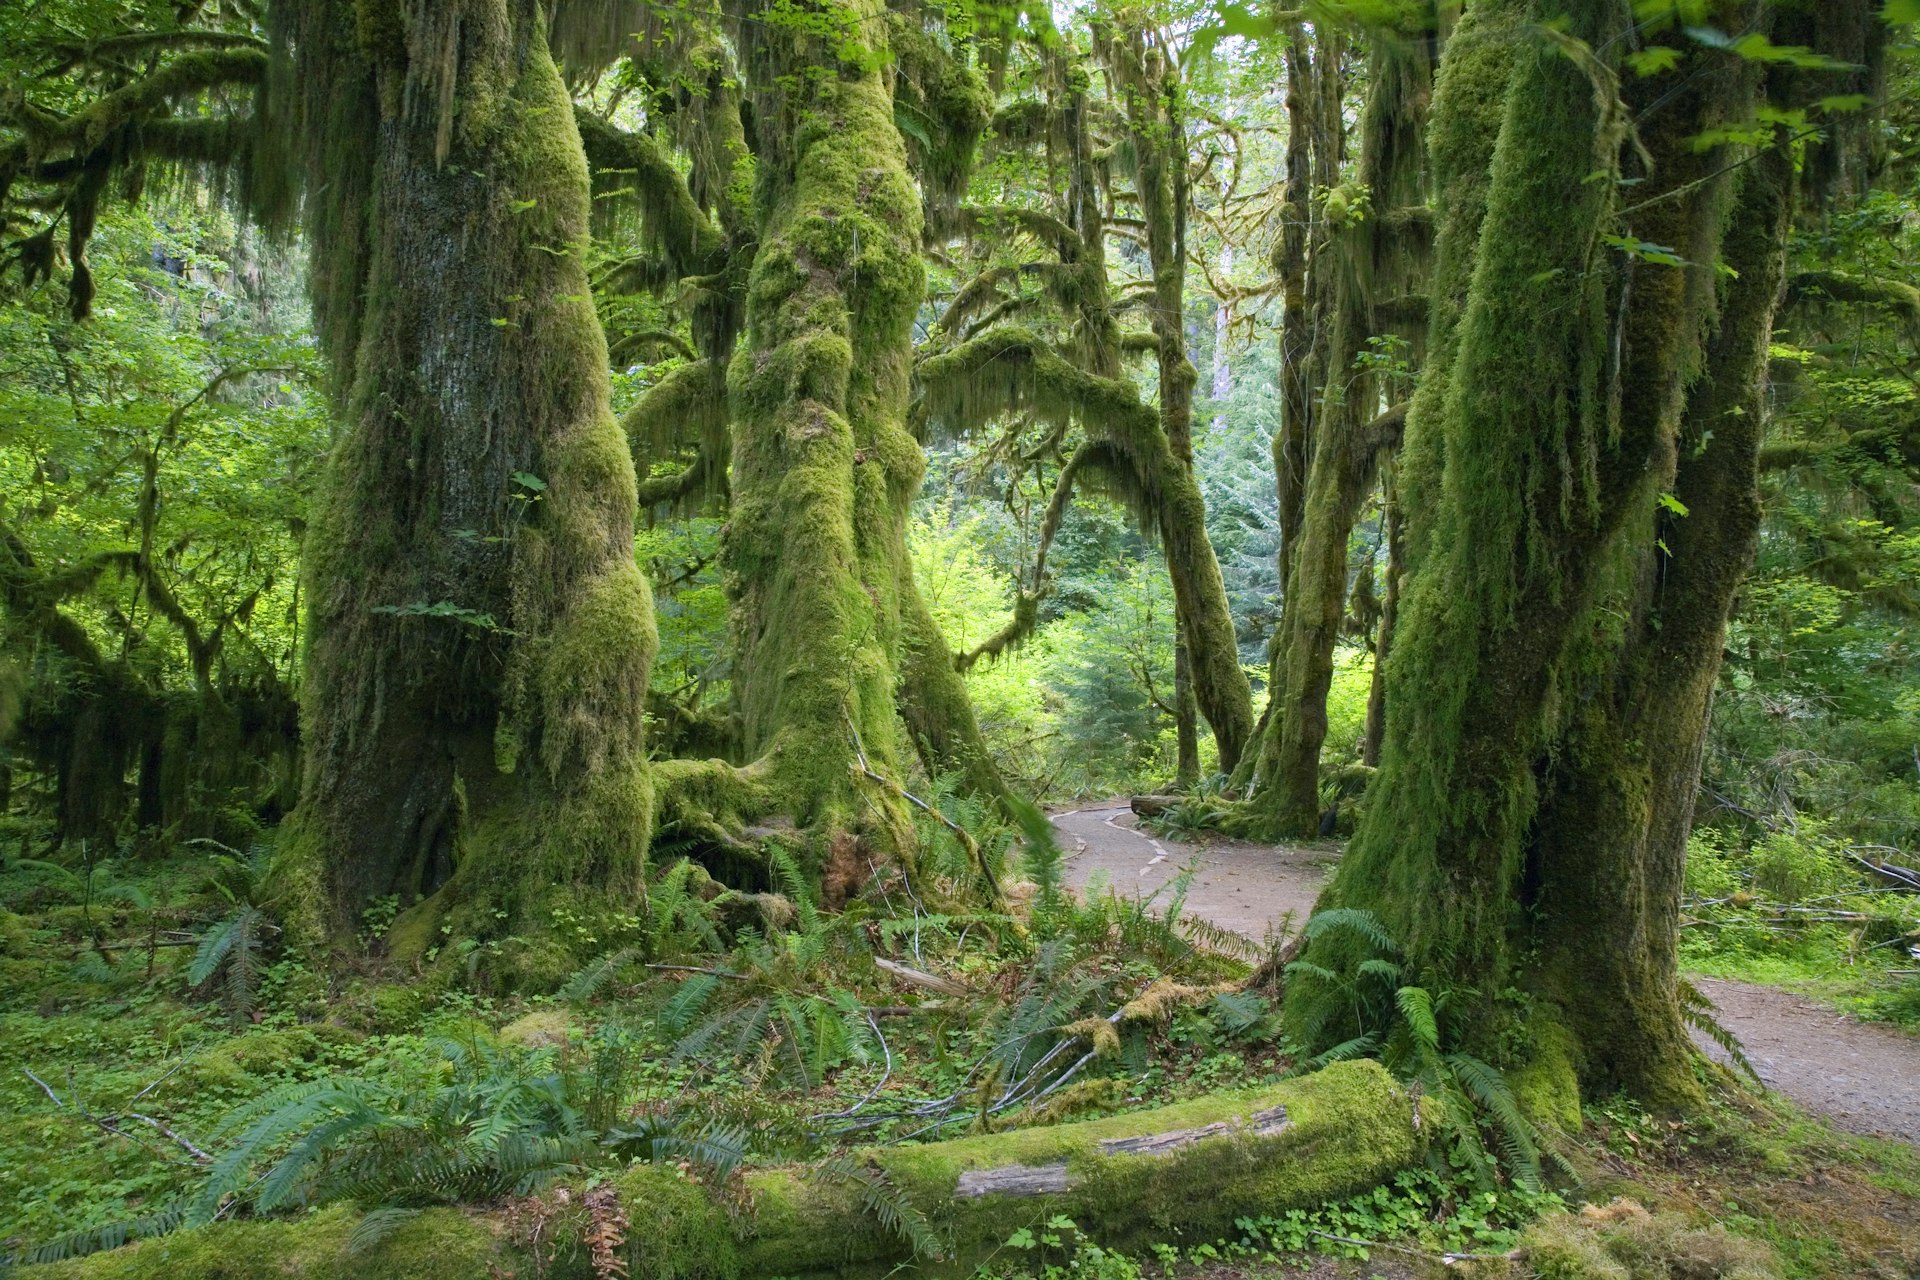 USA, Washington, Olympic National Park, Hoh Rain Forest, Hall of Mosses Trail with Big leaf maples